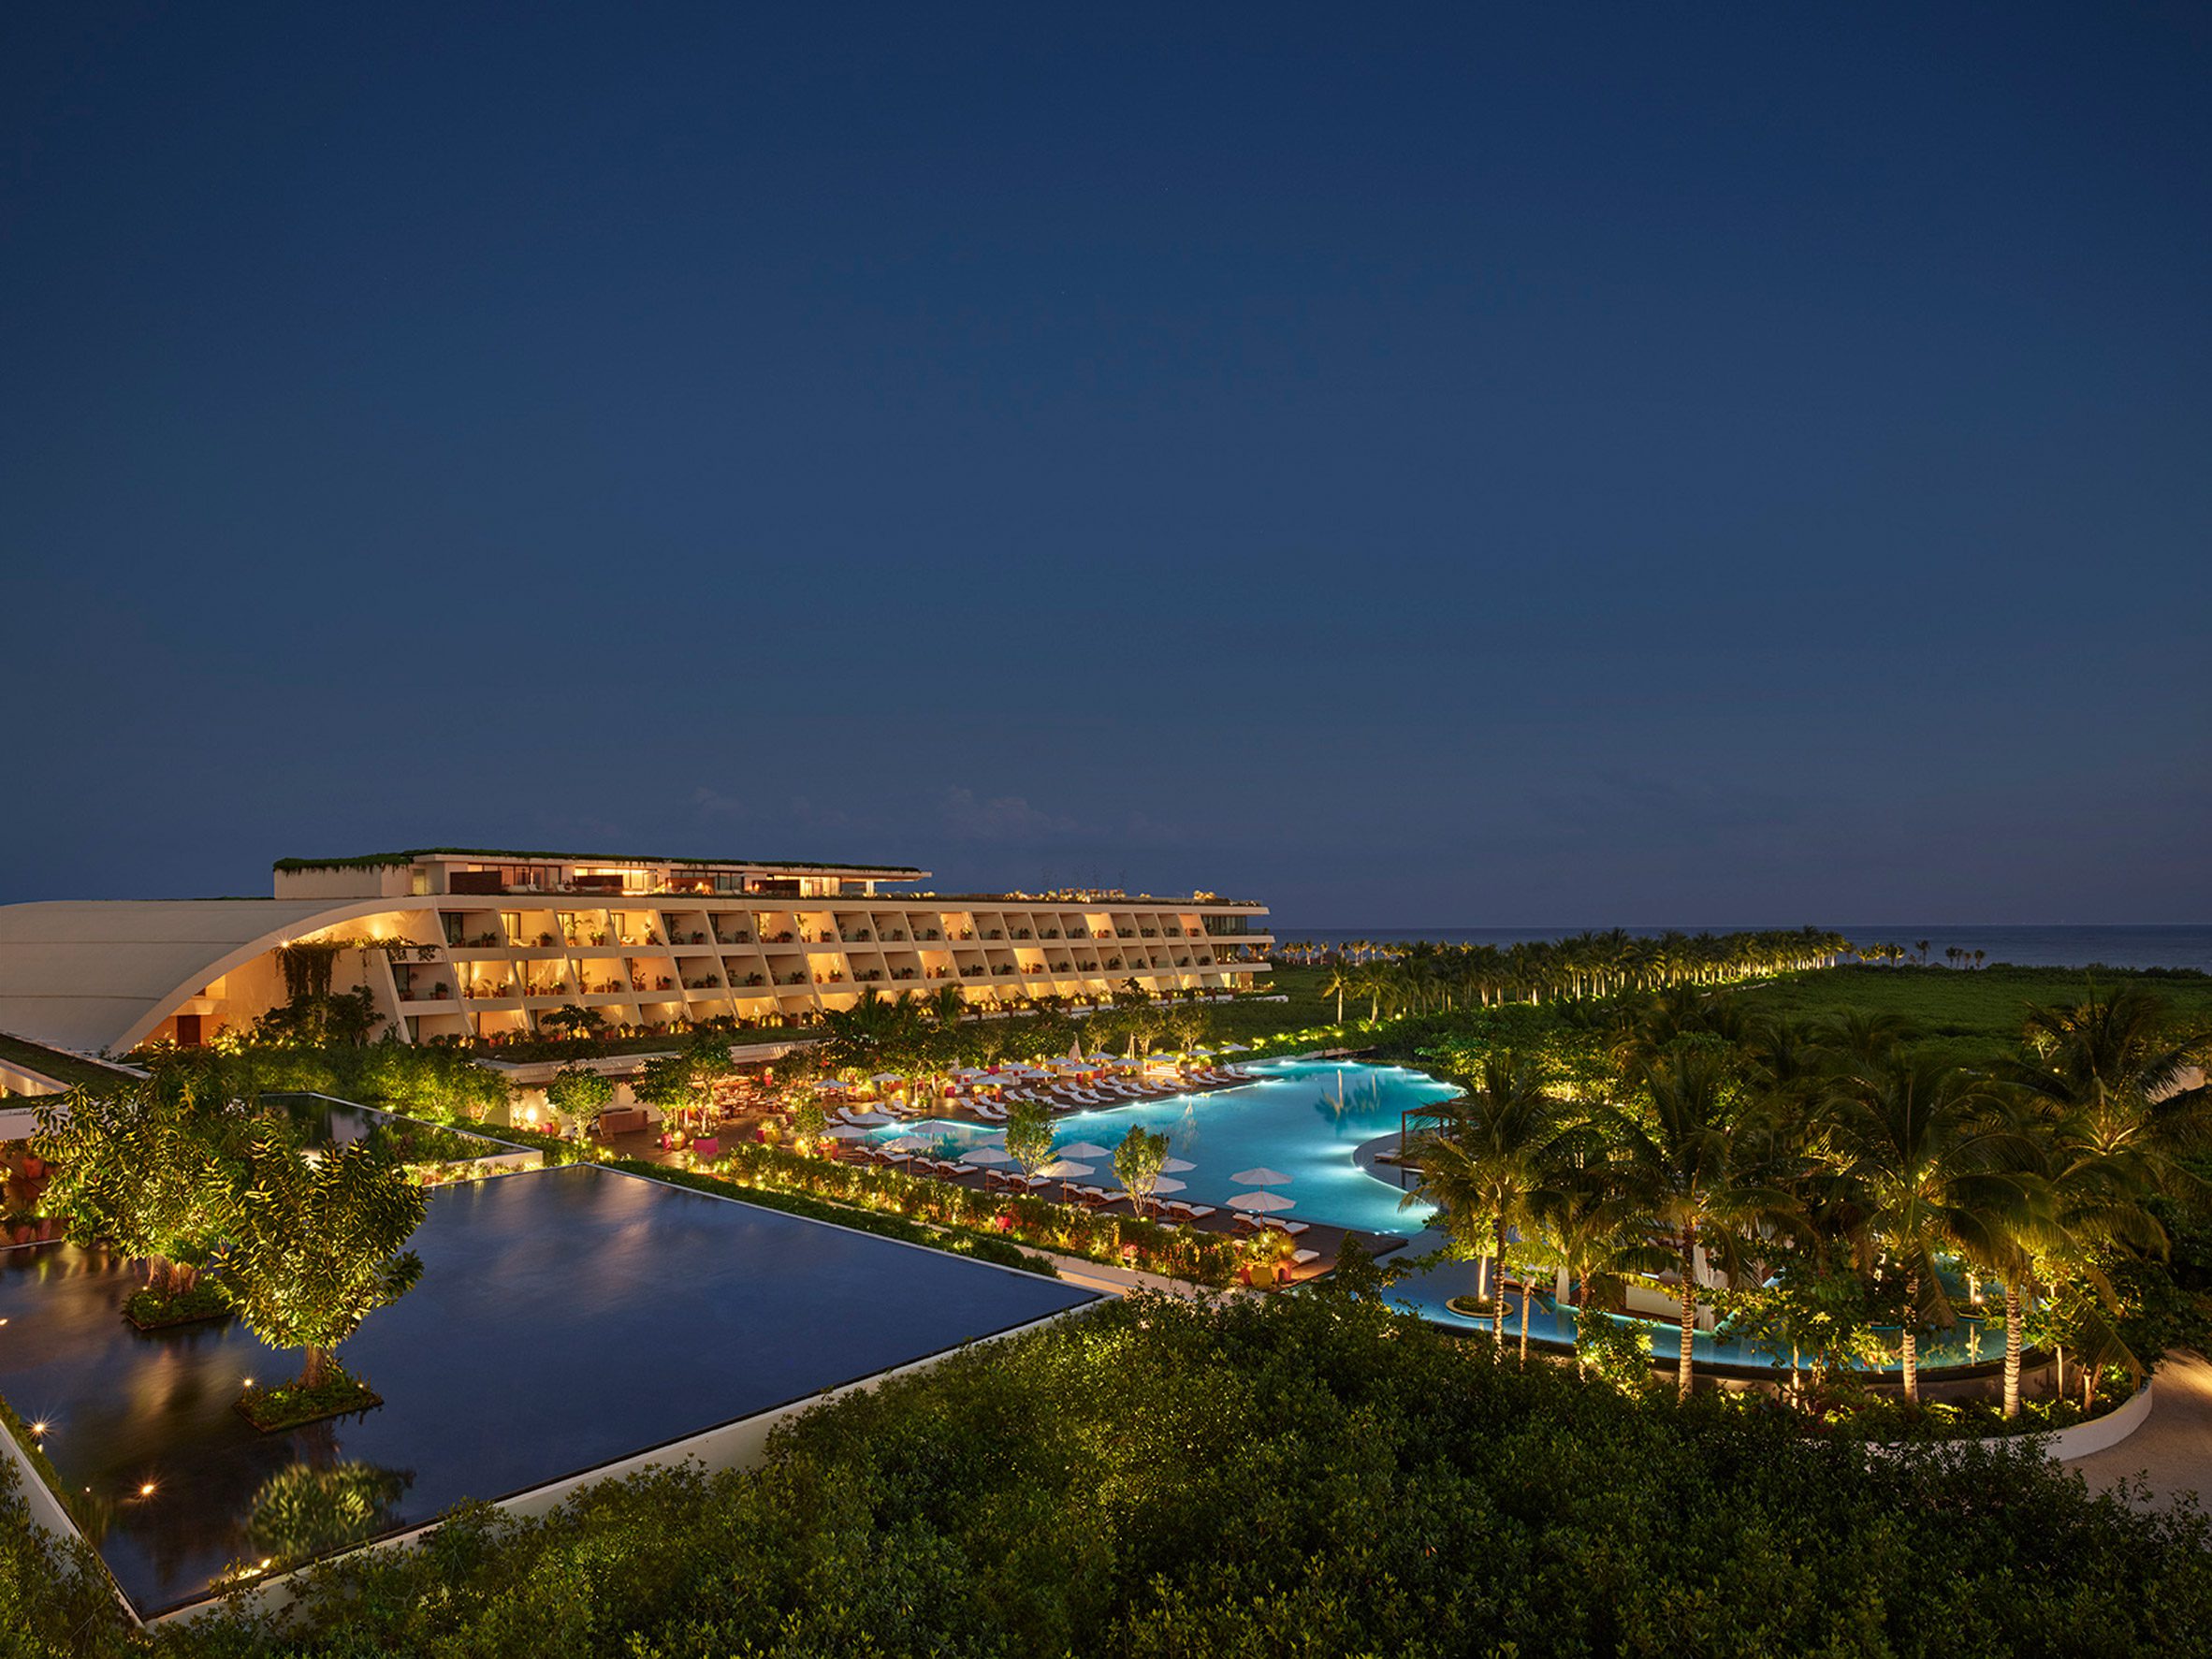 Night view of the pools and buildings of Riviera Maya Edition